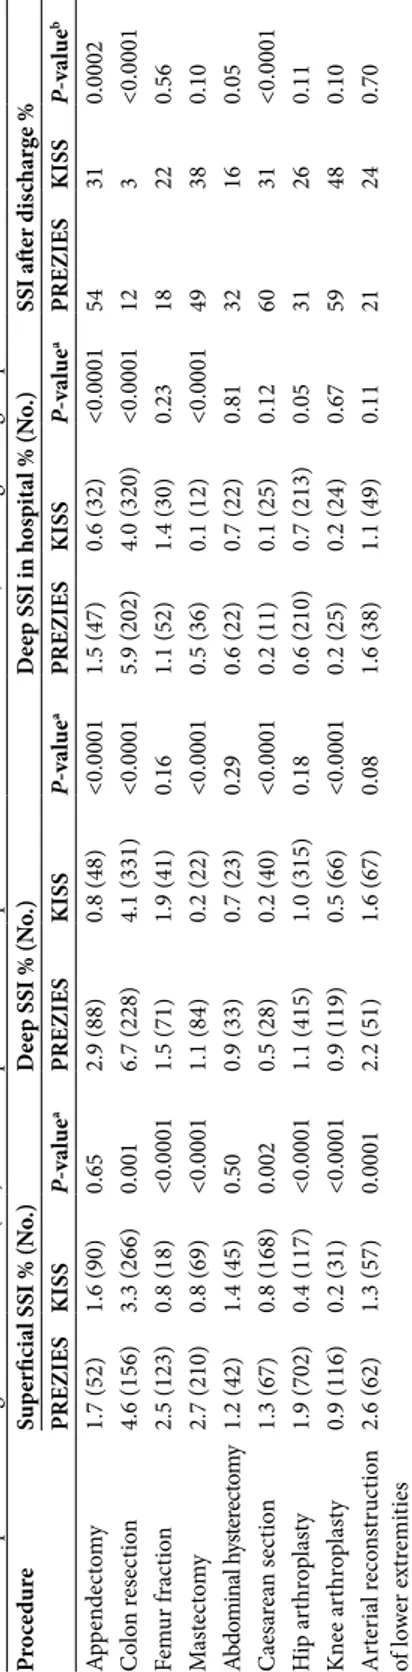 table 4. Comparison of surgical site infection (SSI) rates for superficial and deep SSI between PREZIES and KISS, according to surgical procedure